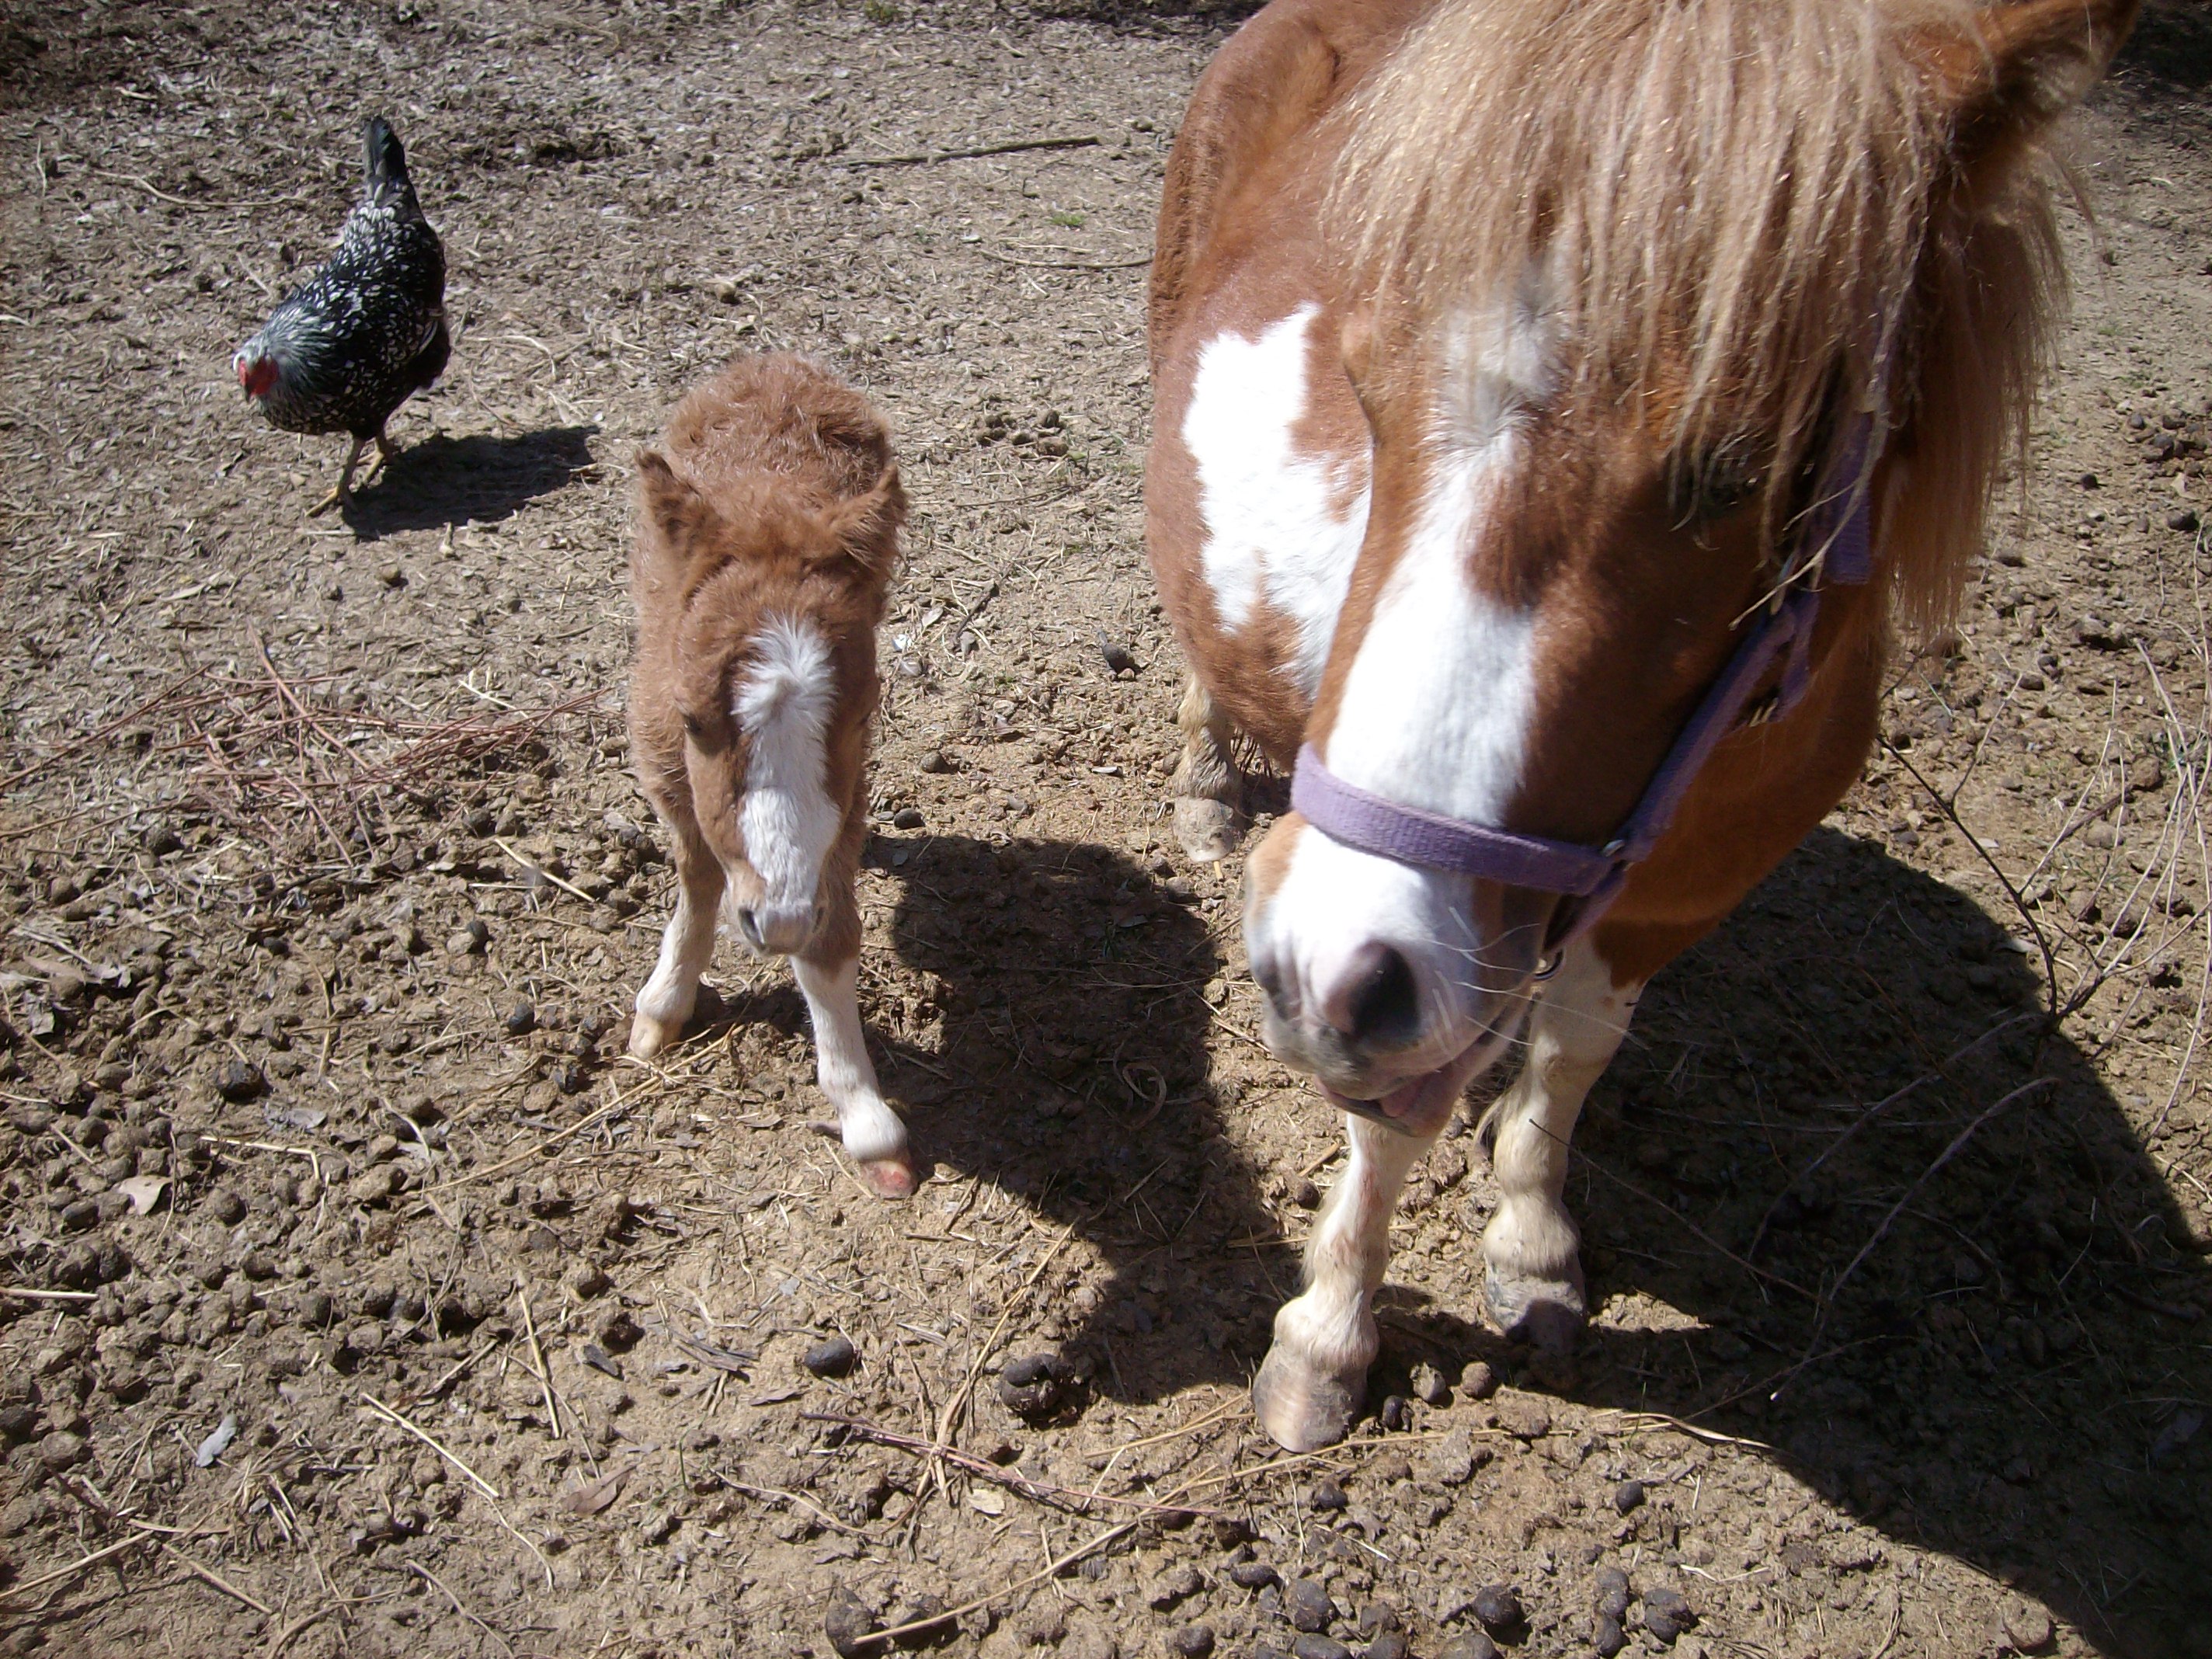 Just a few hours old.  My miniature horse, Shortcake, and her baby.